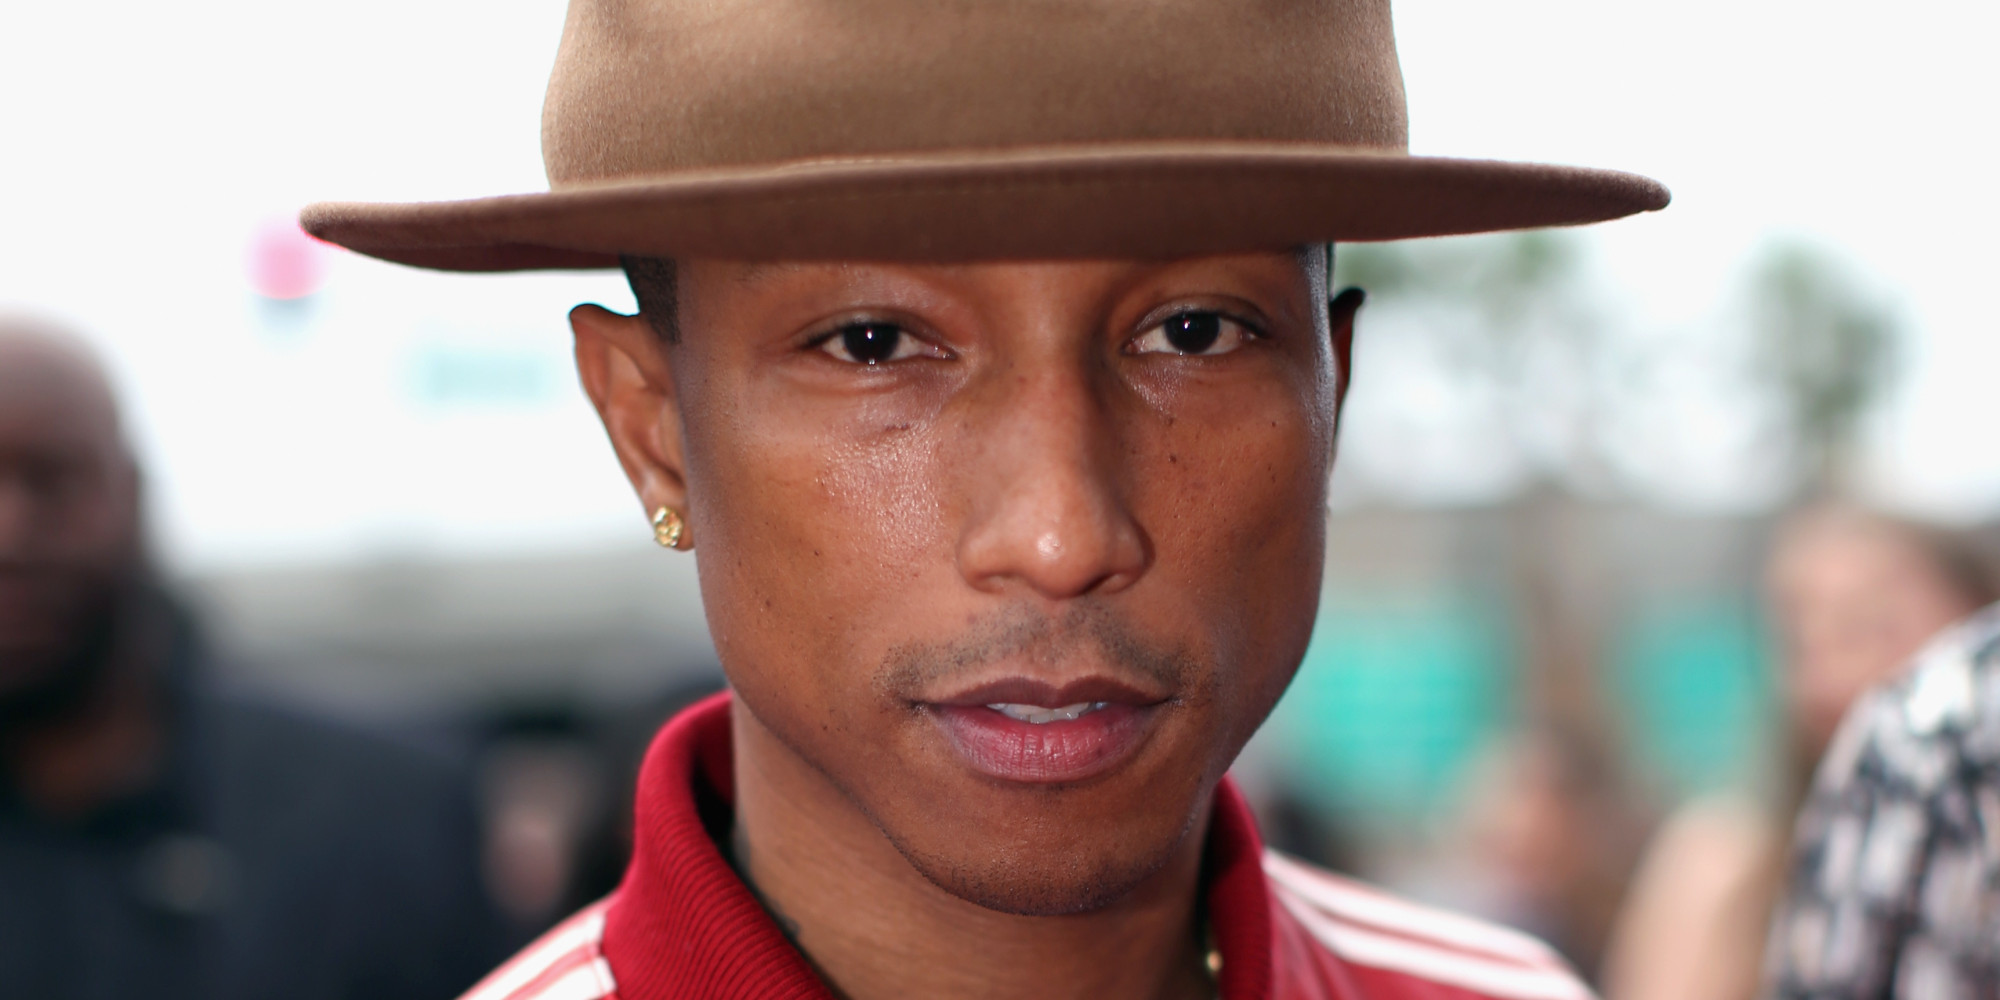 Pharrell Williams Wallpaper Pictures HD